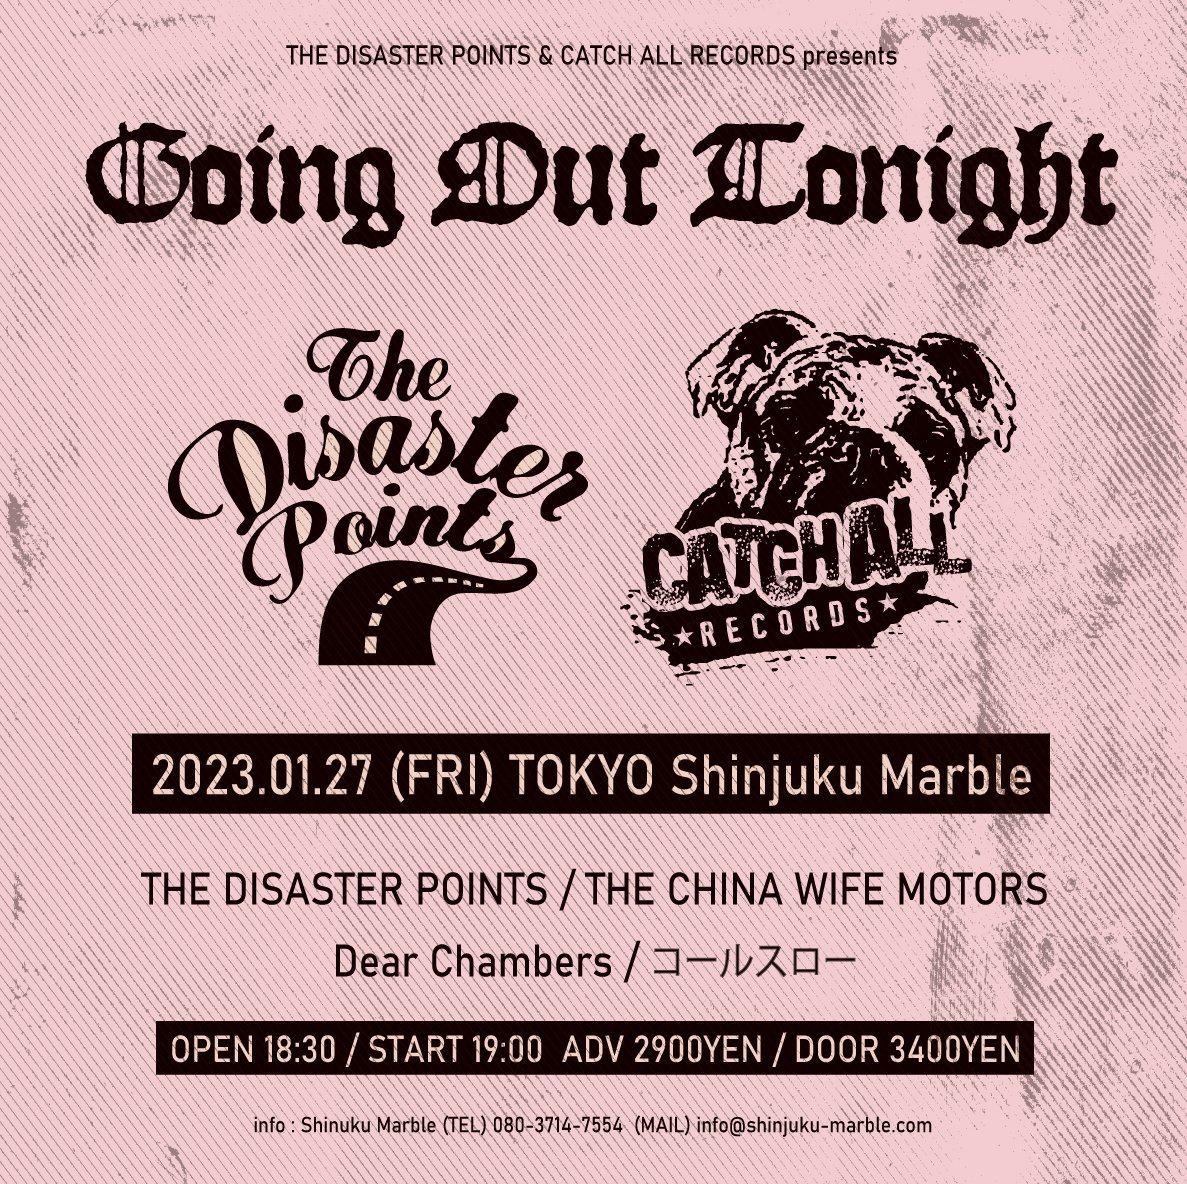 「GOING OUT TONIGHT」開催決定